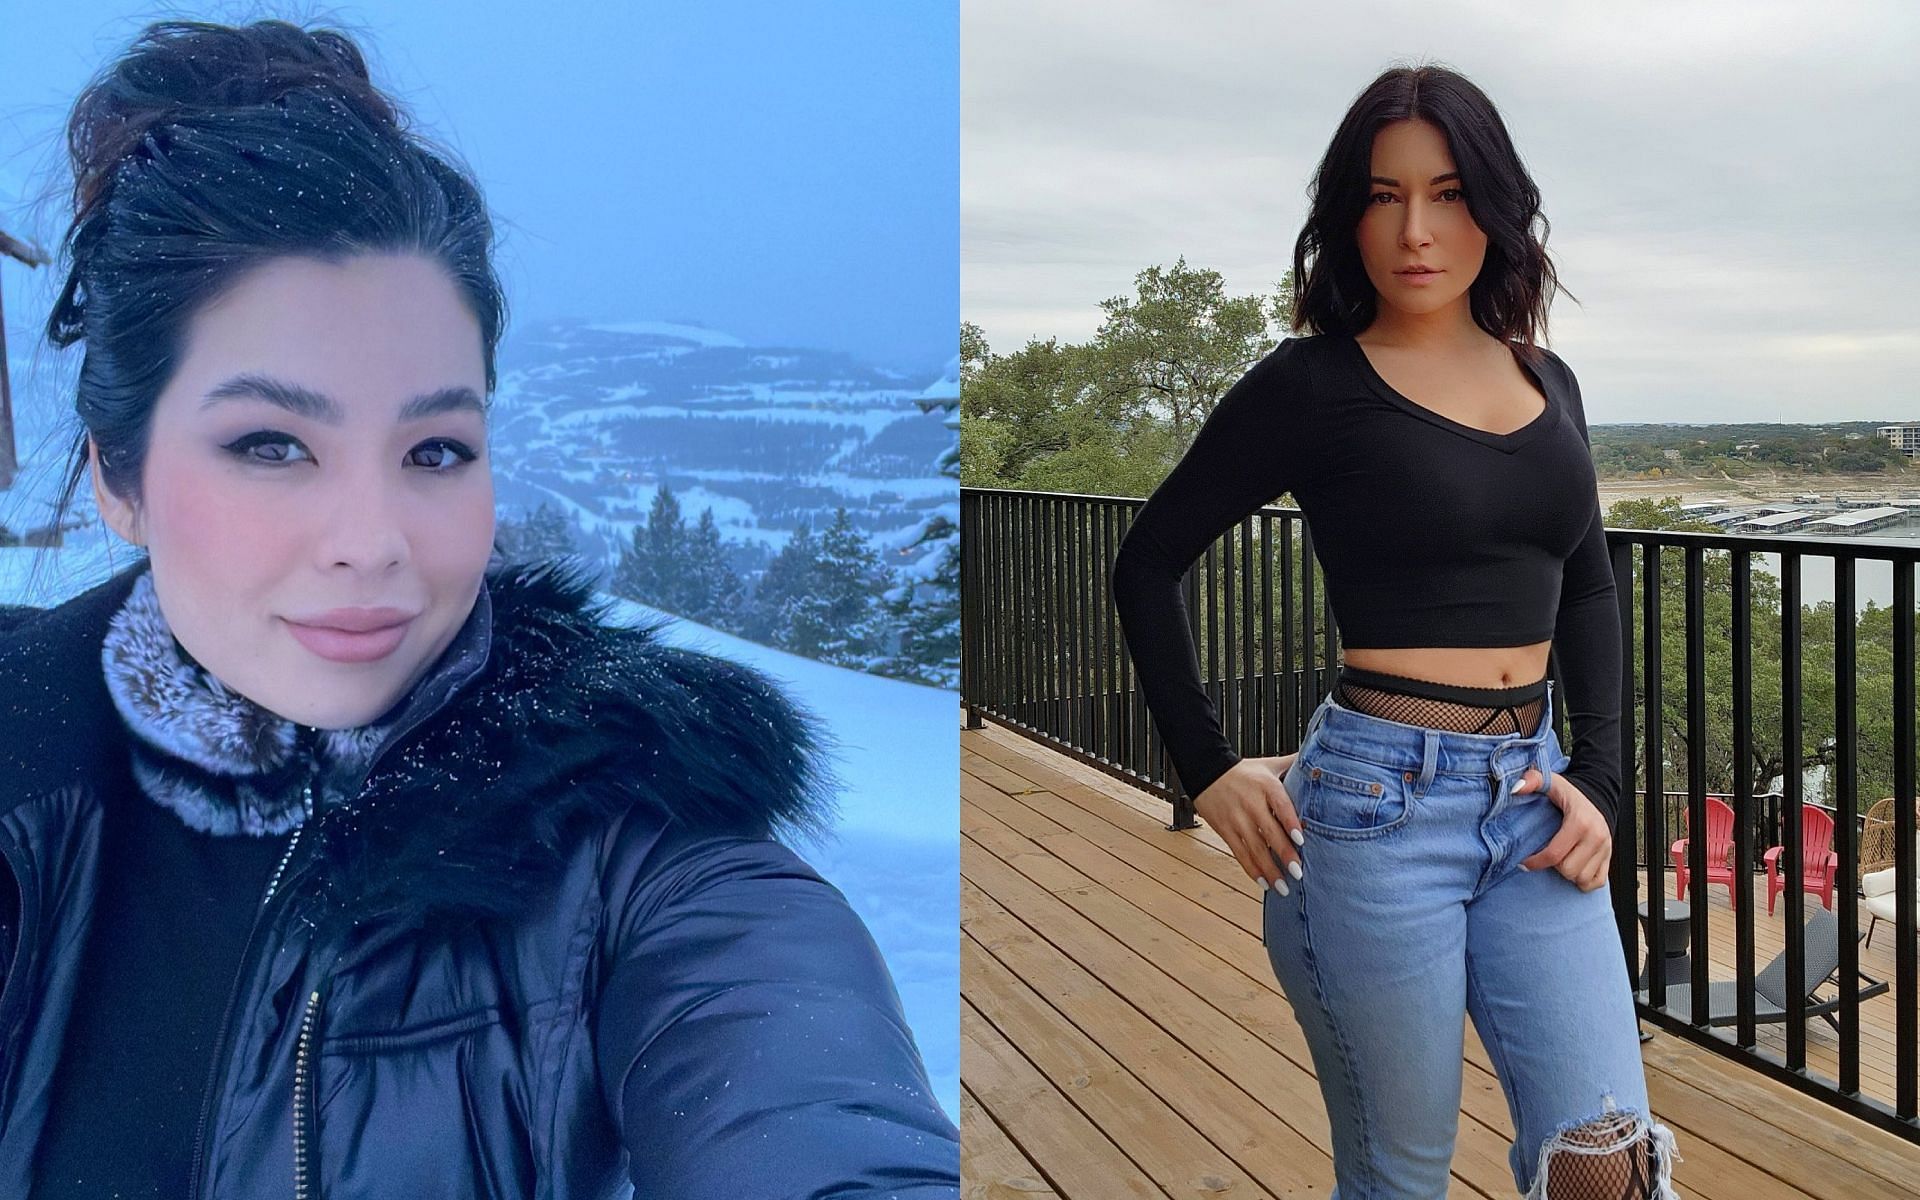 Alinity responds after Caroline Kwan claimed she could easily beat the former in a boxing match (Images via Caroline Kwan and Alinity/Twitter)